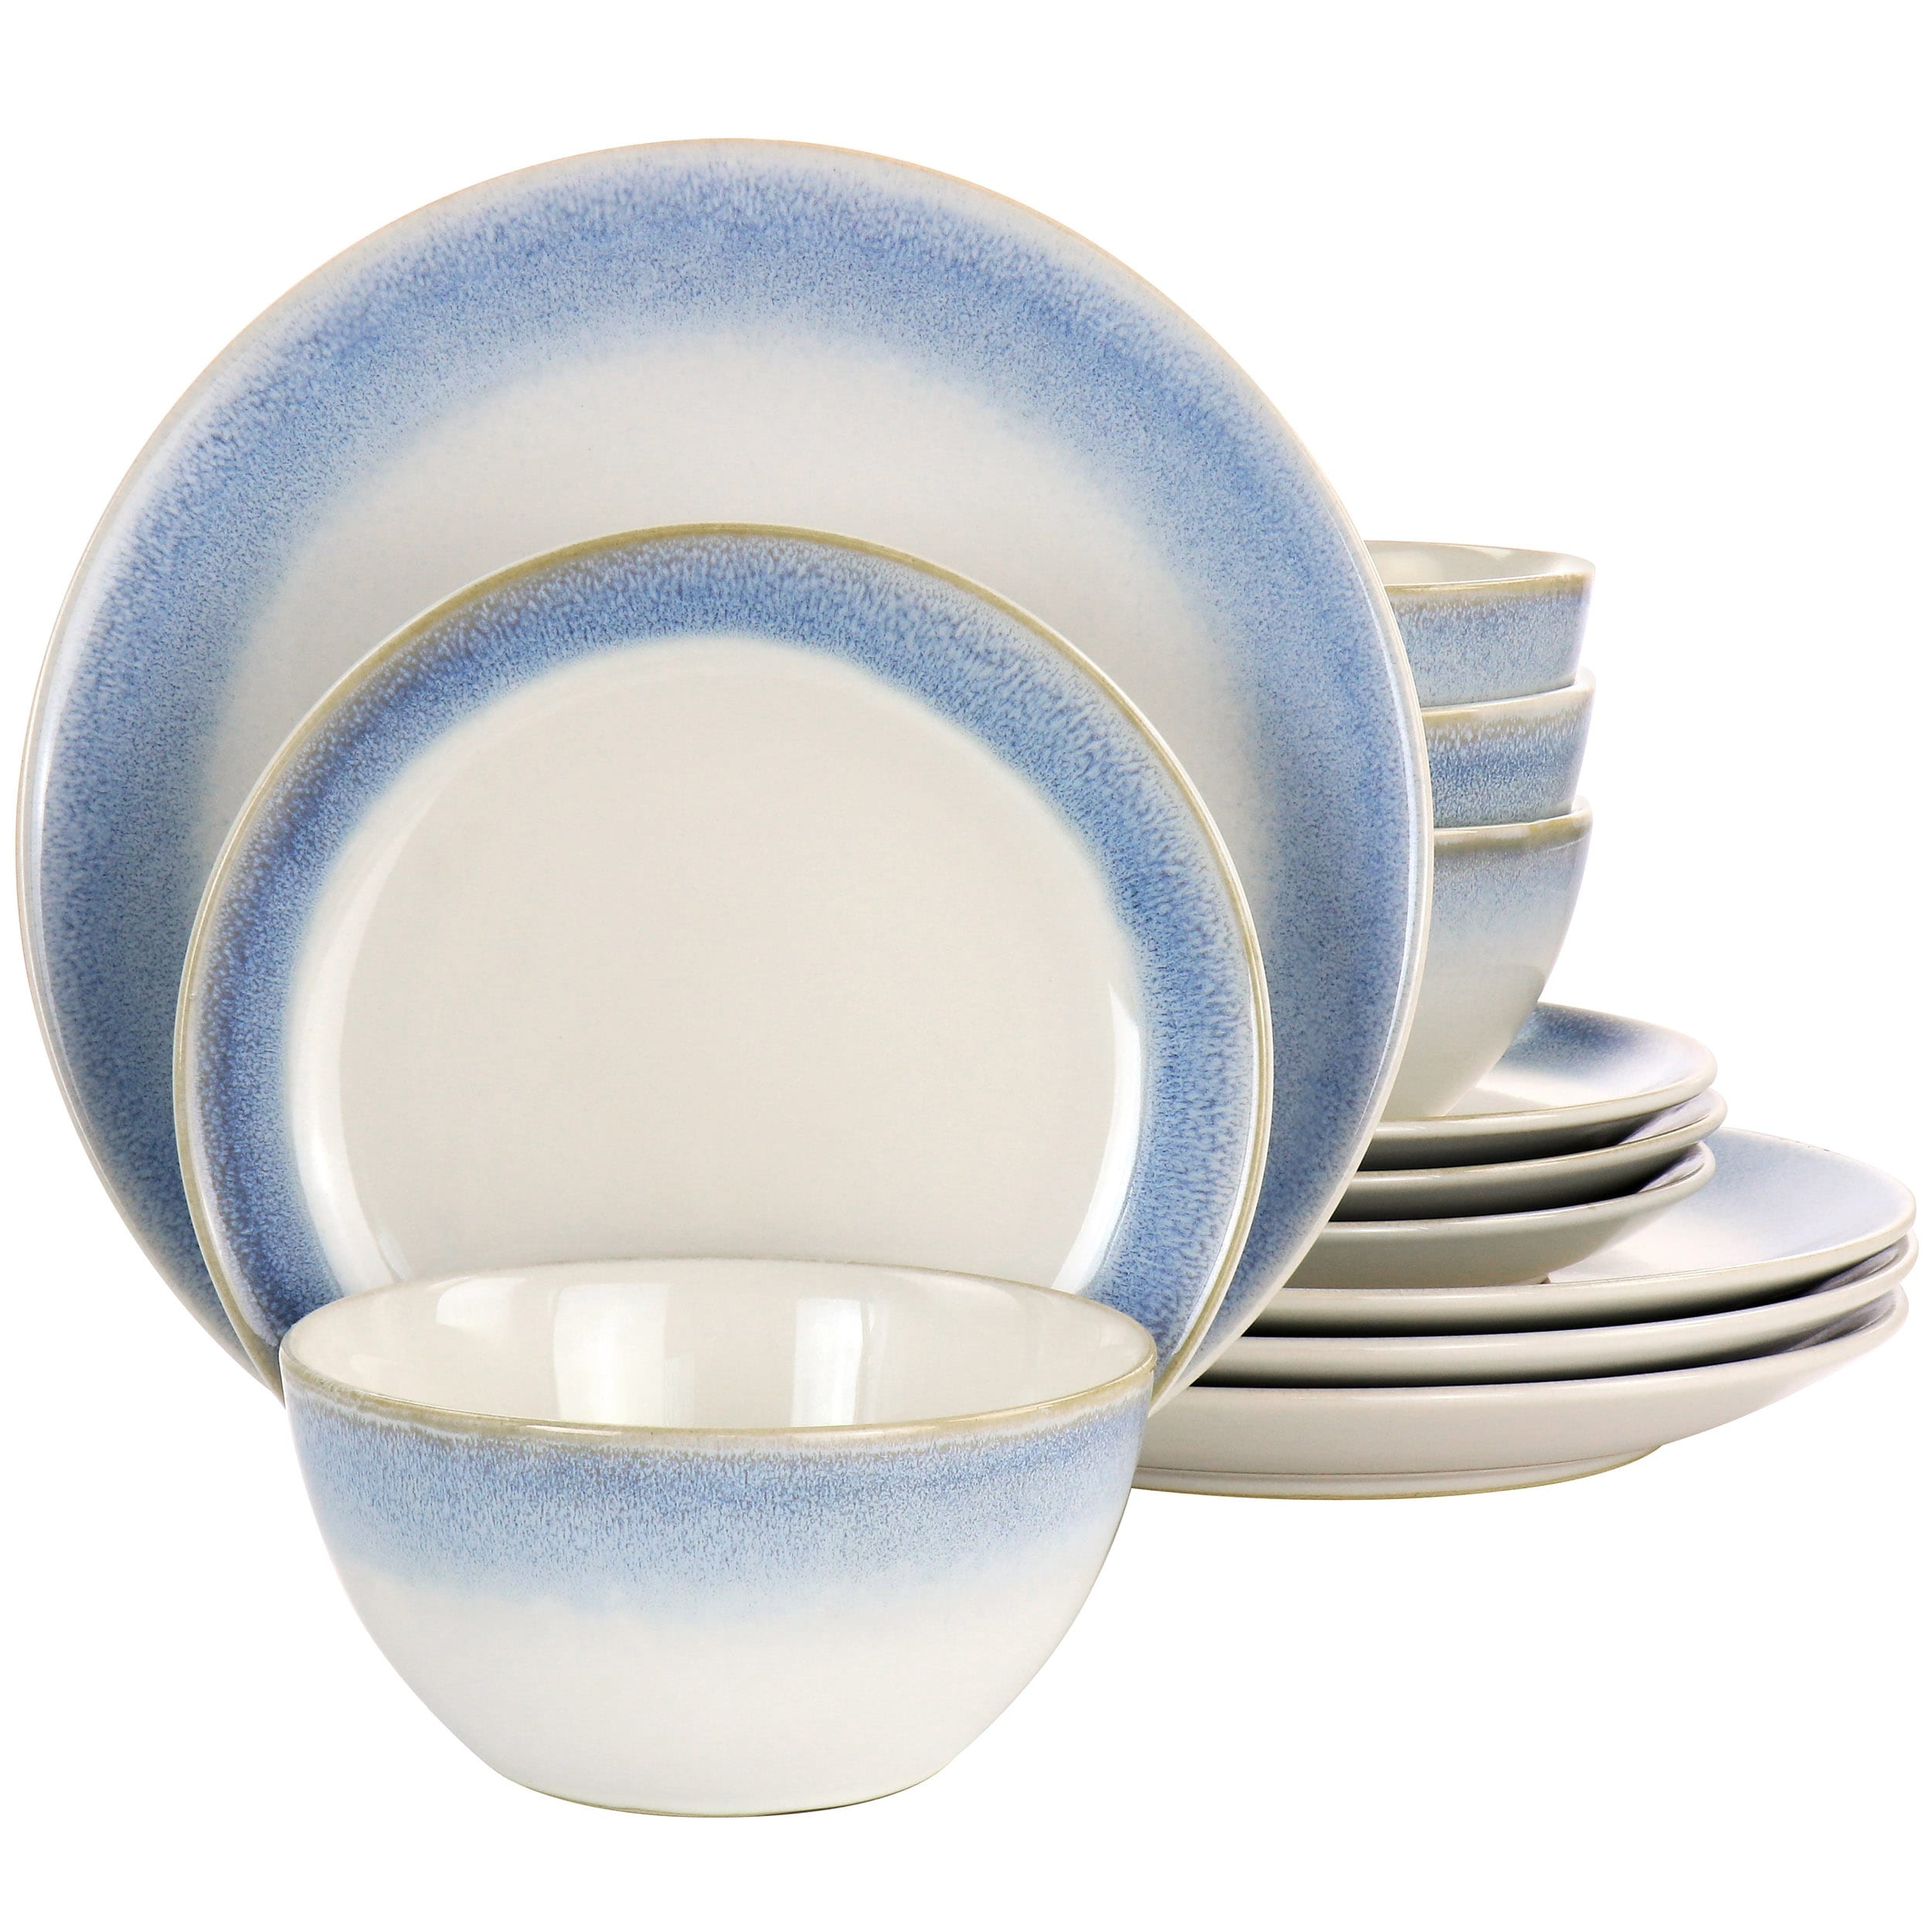 https://ak1.ostkcdn.com/images/products/is/images/direct/a36308839c21204bf60a872cb378898dfc44e281/Martha-Stewart-12-Piece-Reactive-Glaze-Rimmed-Stoneware-Dinnerware-Set-in-Blue.jpg